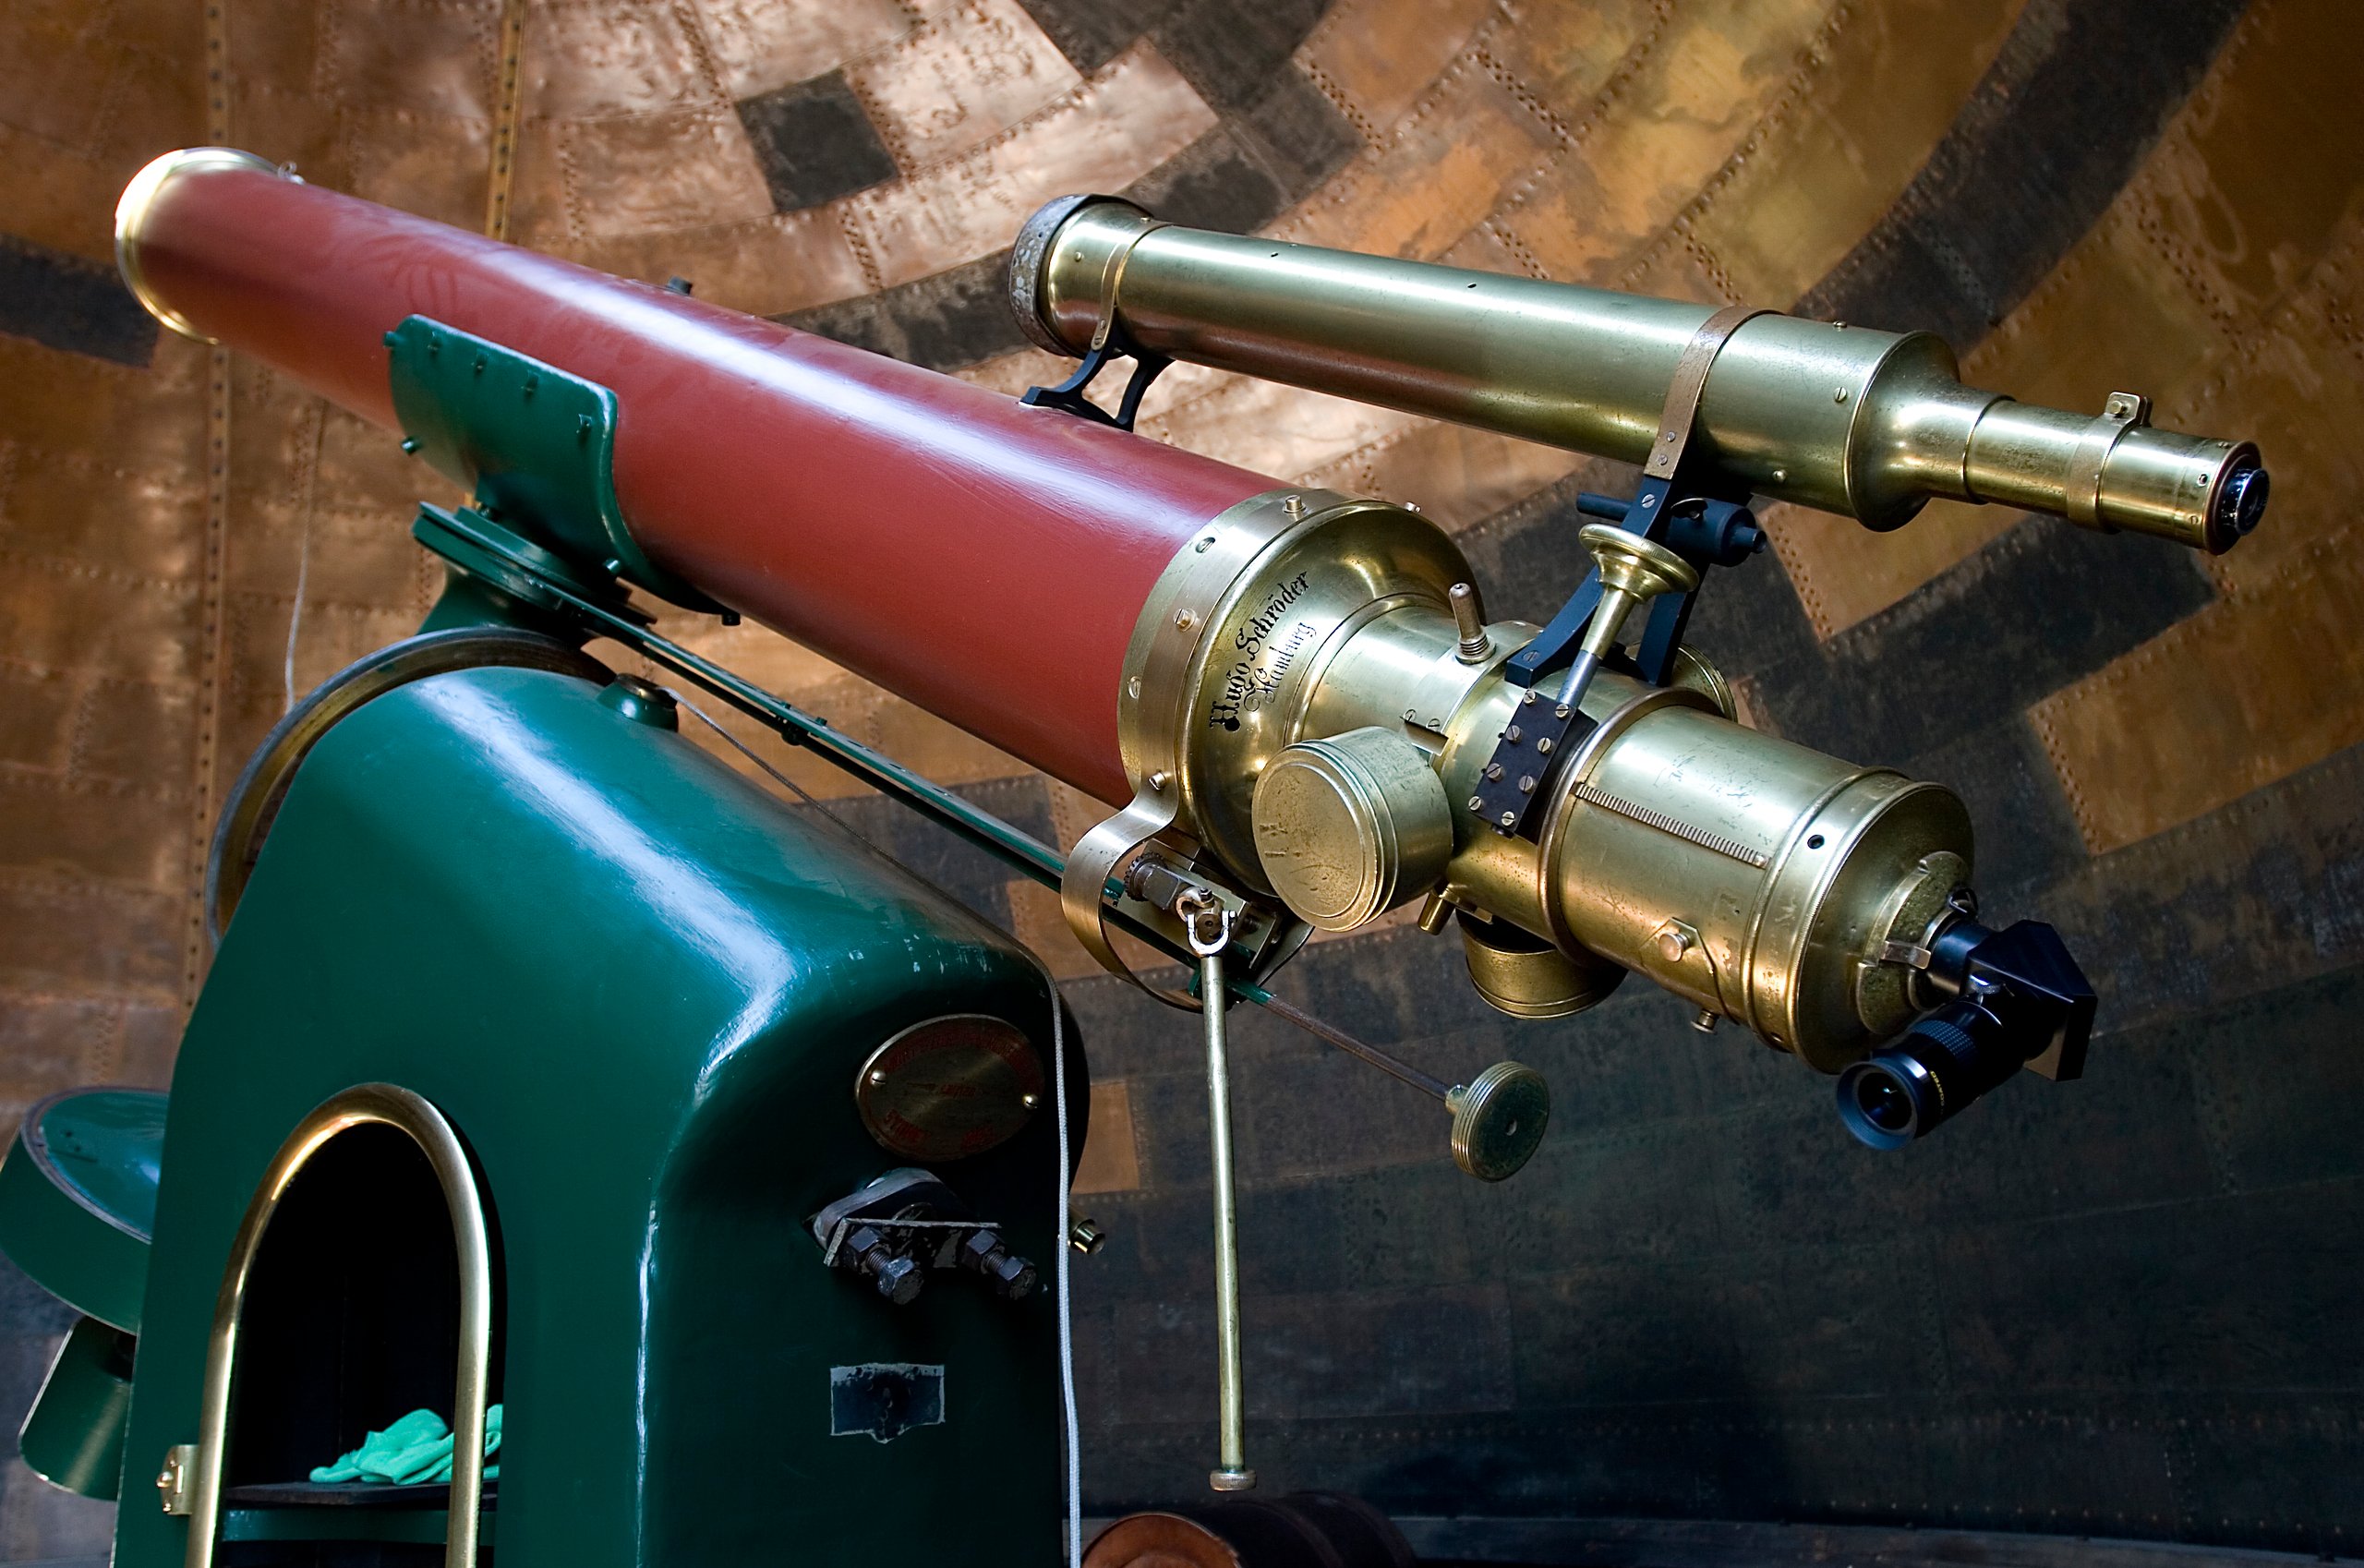 Equatorial refracting telescope with accessories by Hugo Schroeder